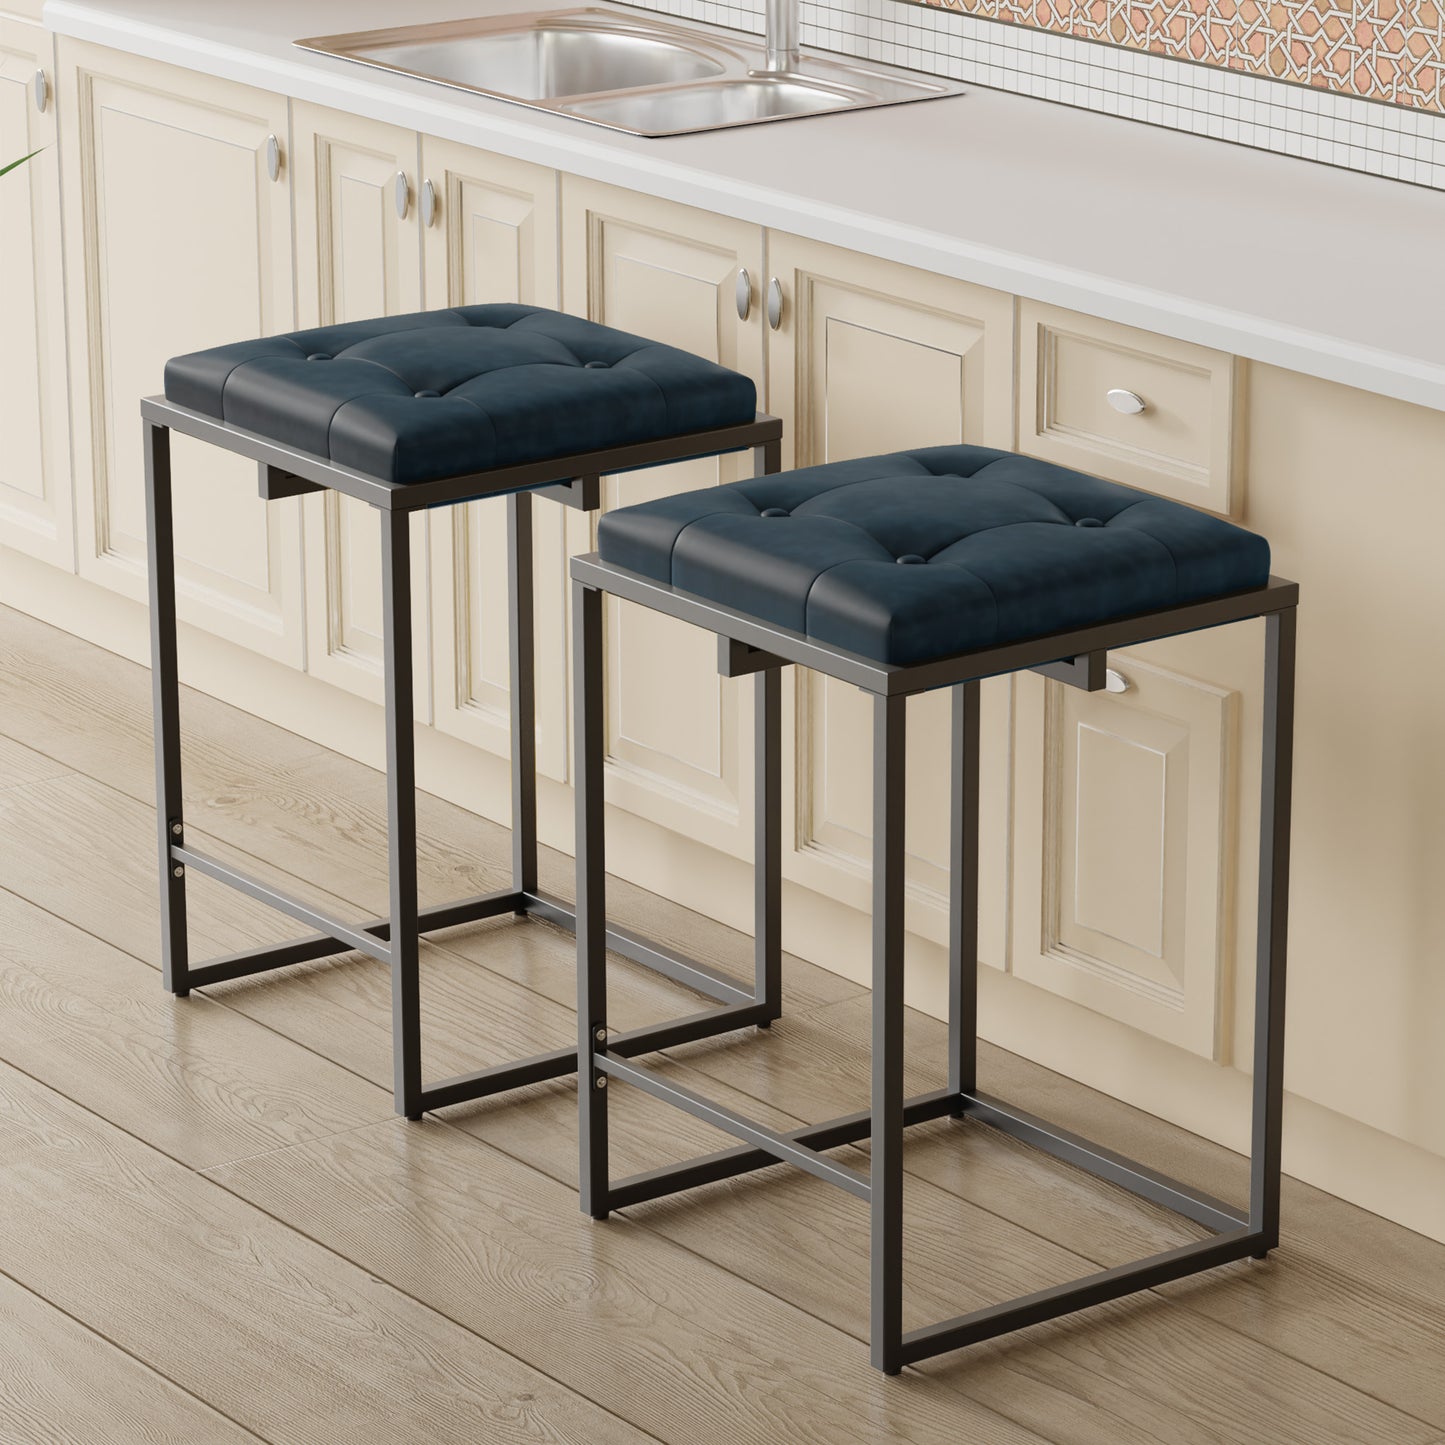 Cozy Castle Barstool Set of 2, Square Tufted Counter Stool, 24 Inch Island Chairs for Kitchen Counter, Faux Leather Metal Frame Bar Stools, Dark Blue